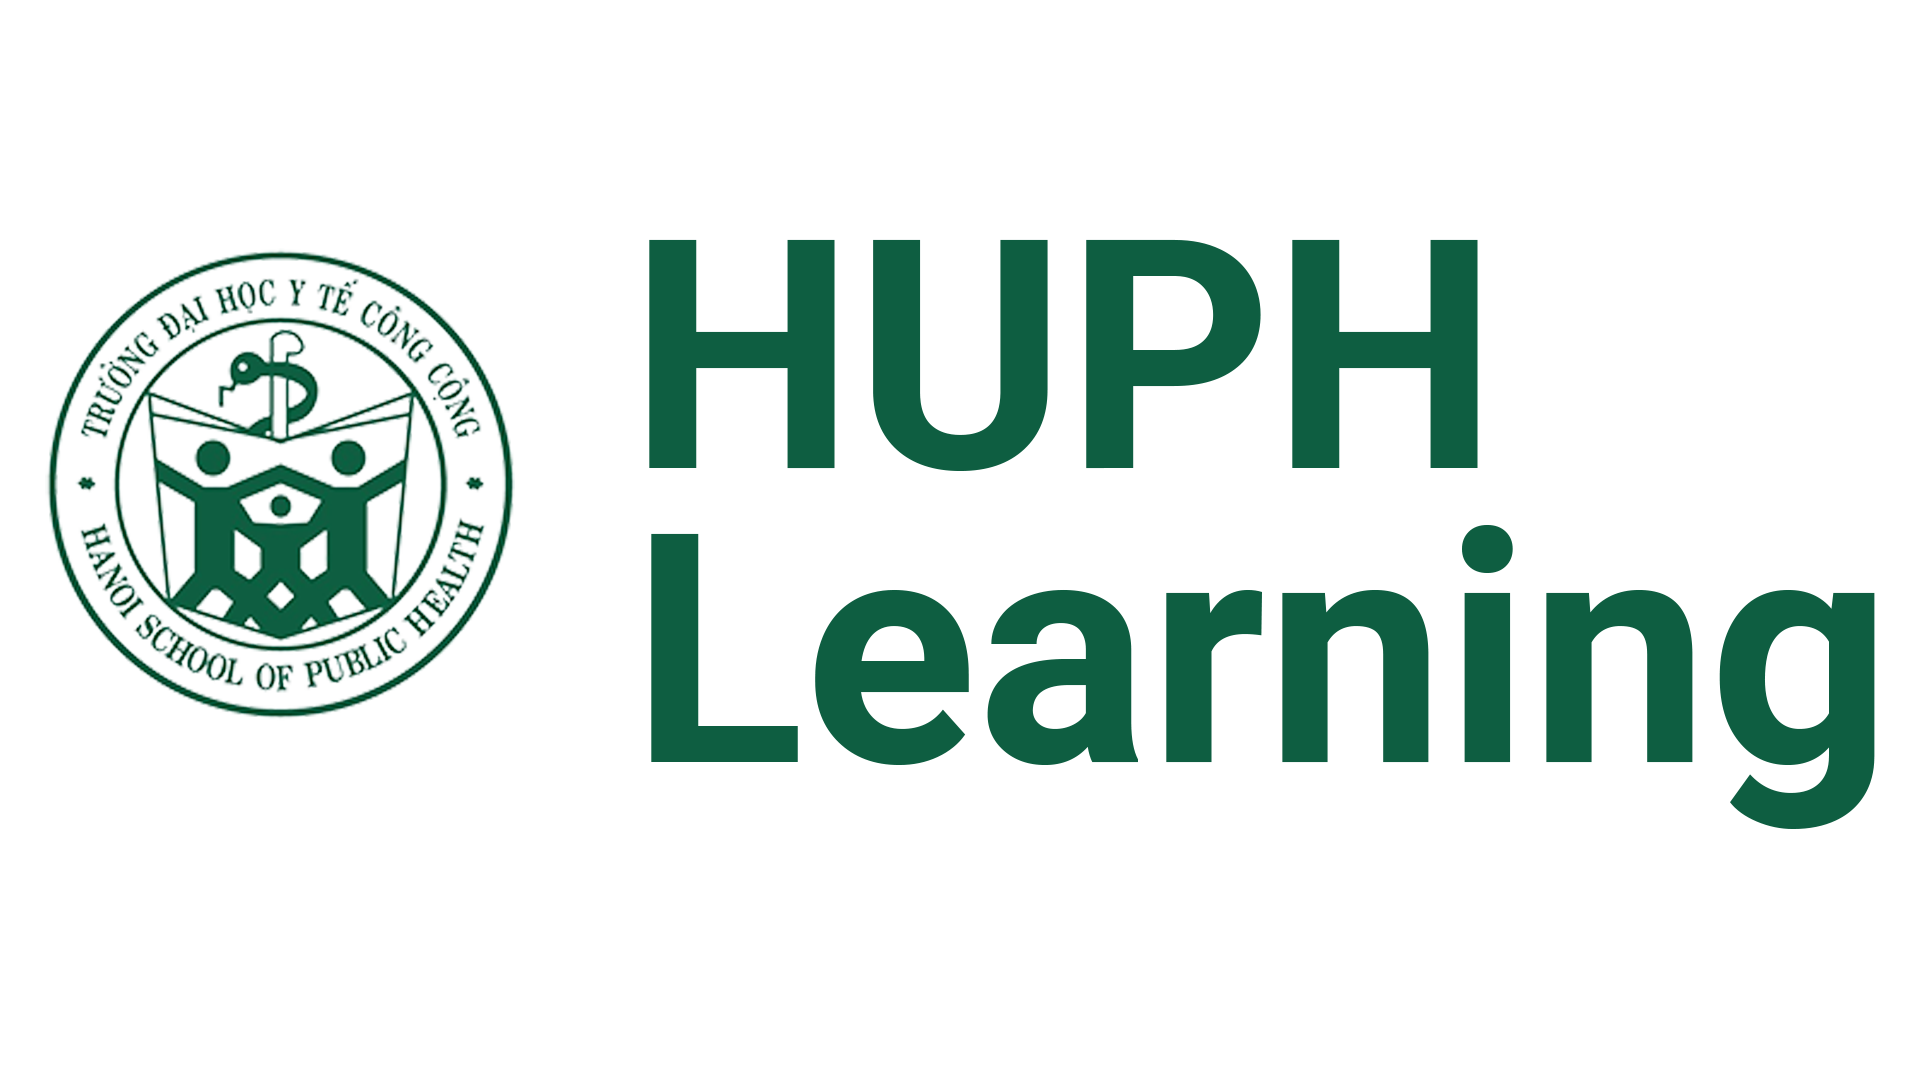 HUPH ONLINE LEARNING SYSTEM